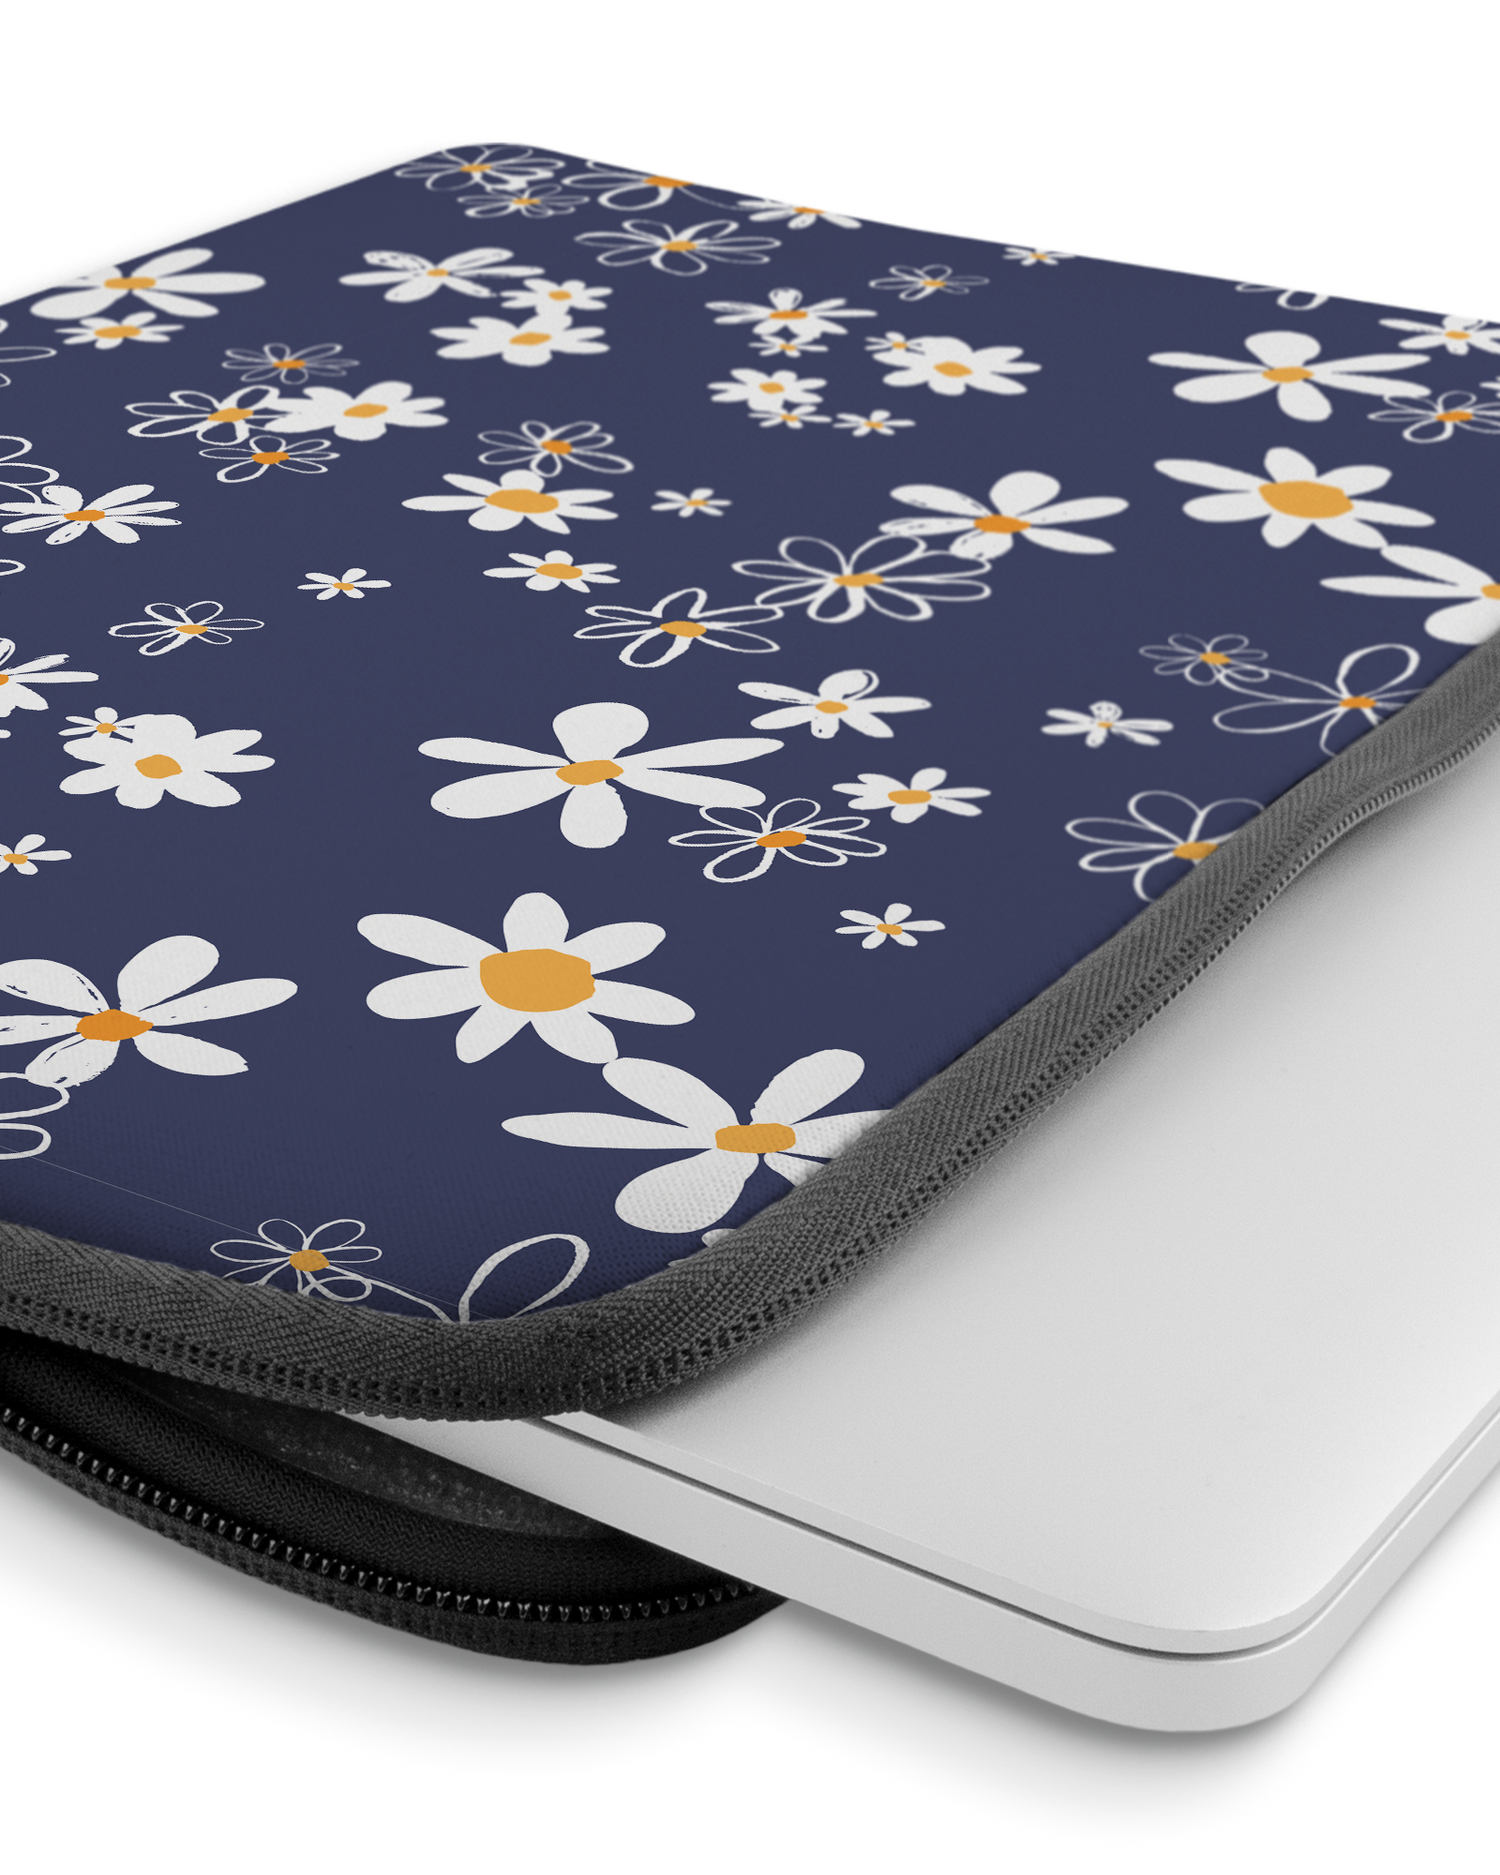 Navy Daisies Laptop Case 14 inch with device inside